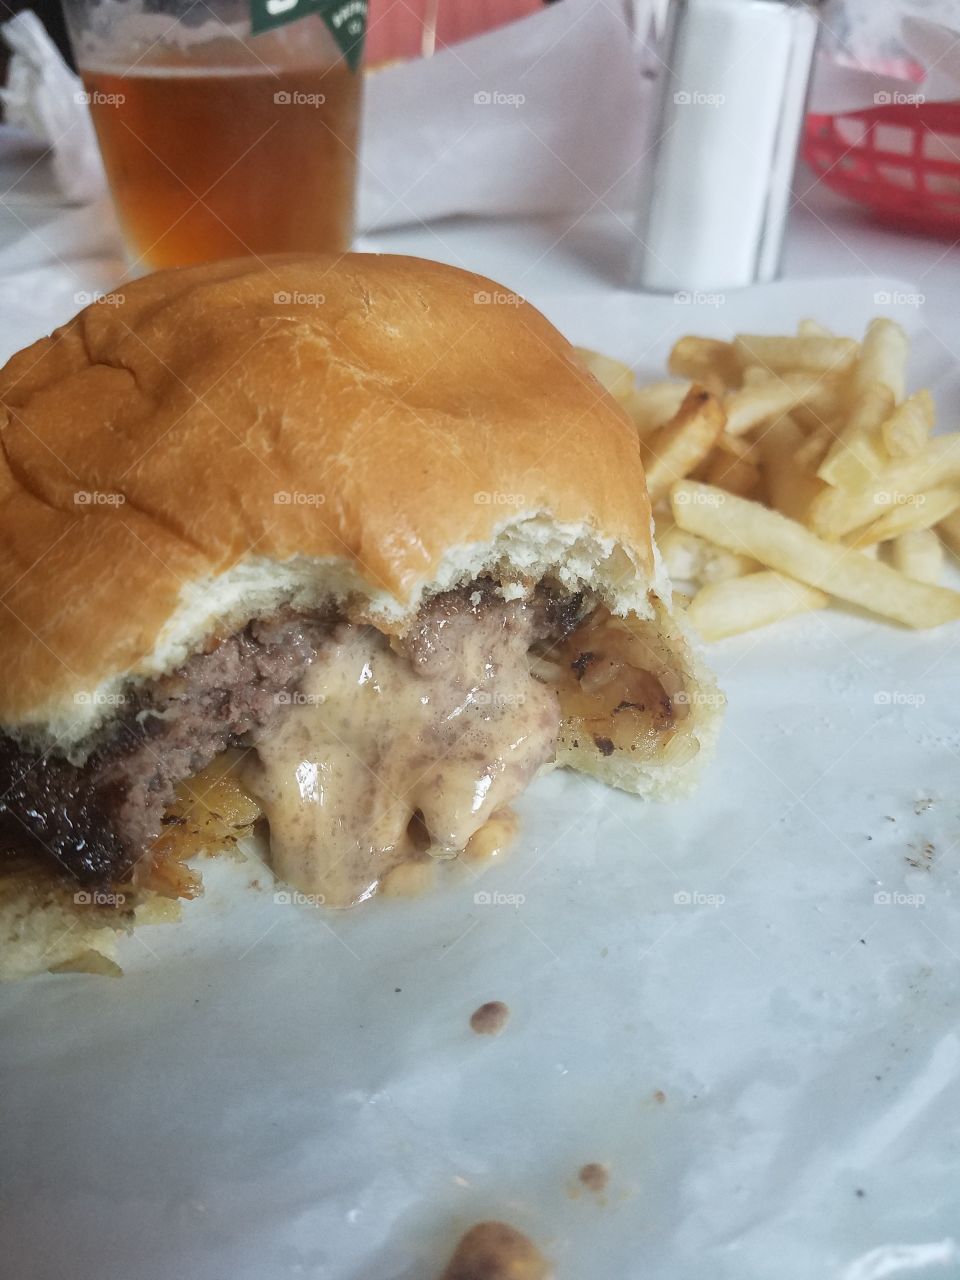 Juicy Lucy burger in Minneapolis with french fries